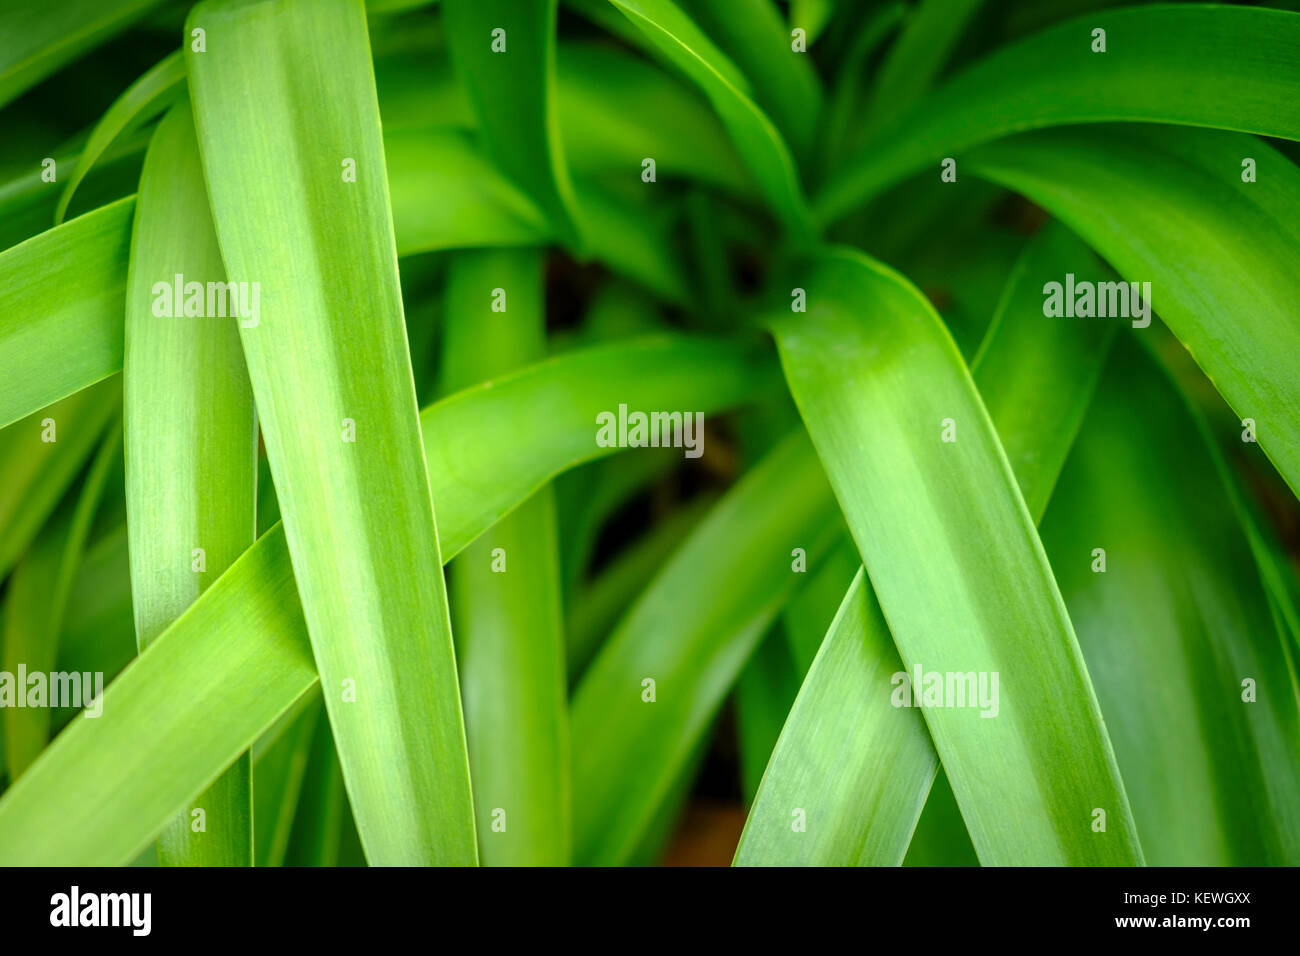 Abstract close up of agapanthus leaves Stock Photo